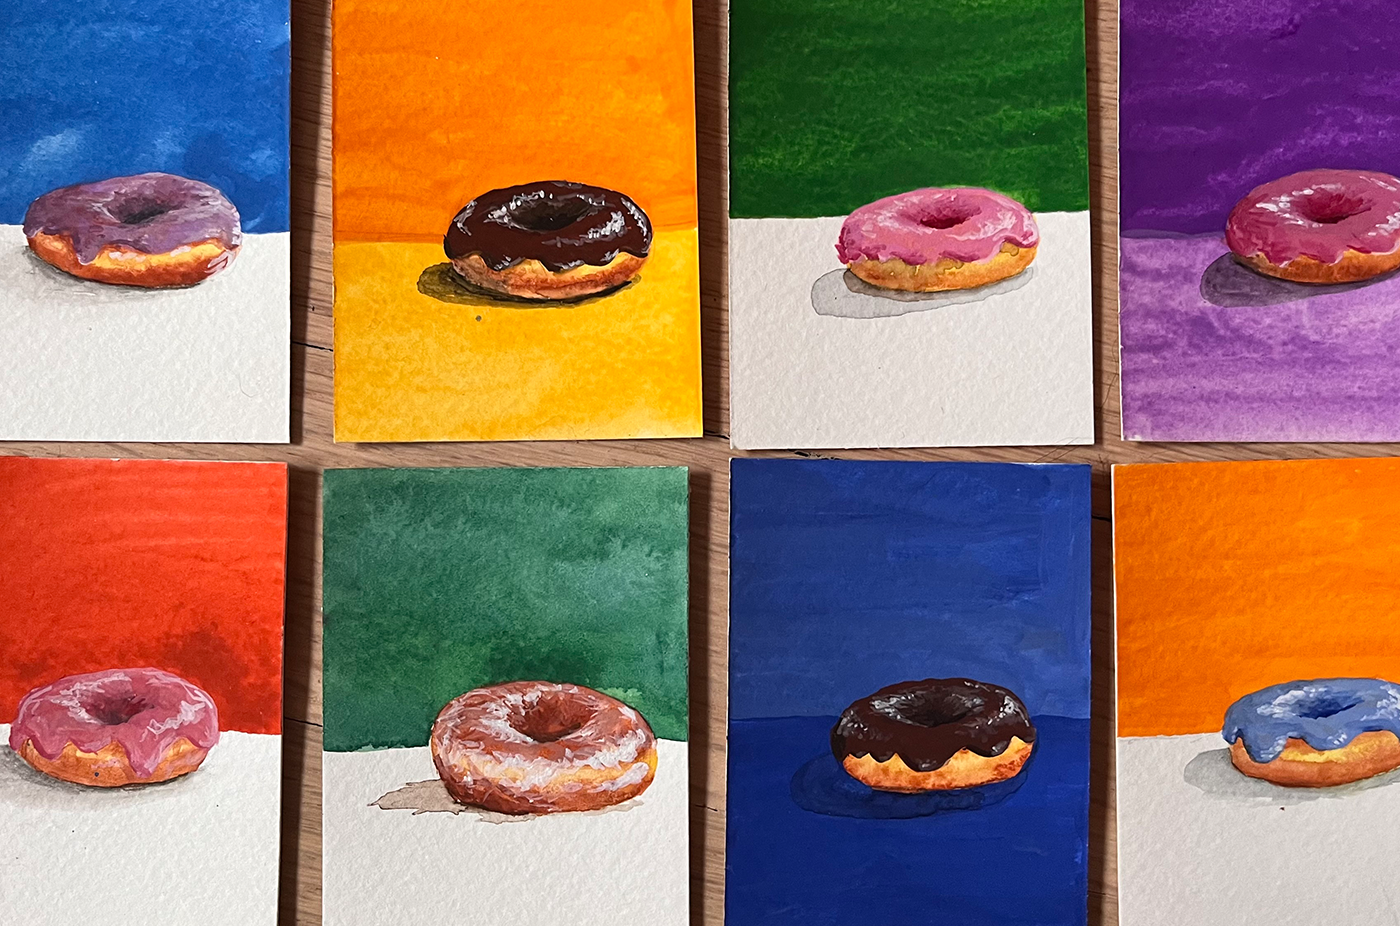 Fun-size Donut Paintings, Apollo Flight Plan Reprints, and Lit-inspired Woodblock Portraits: It's Small Projects Big Time to Shine